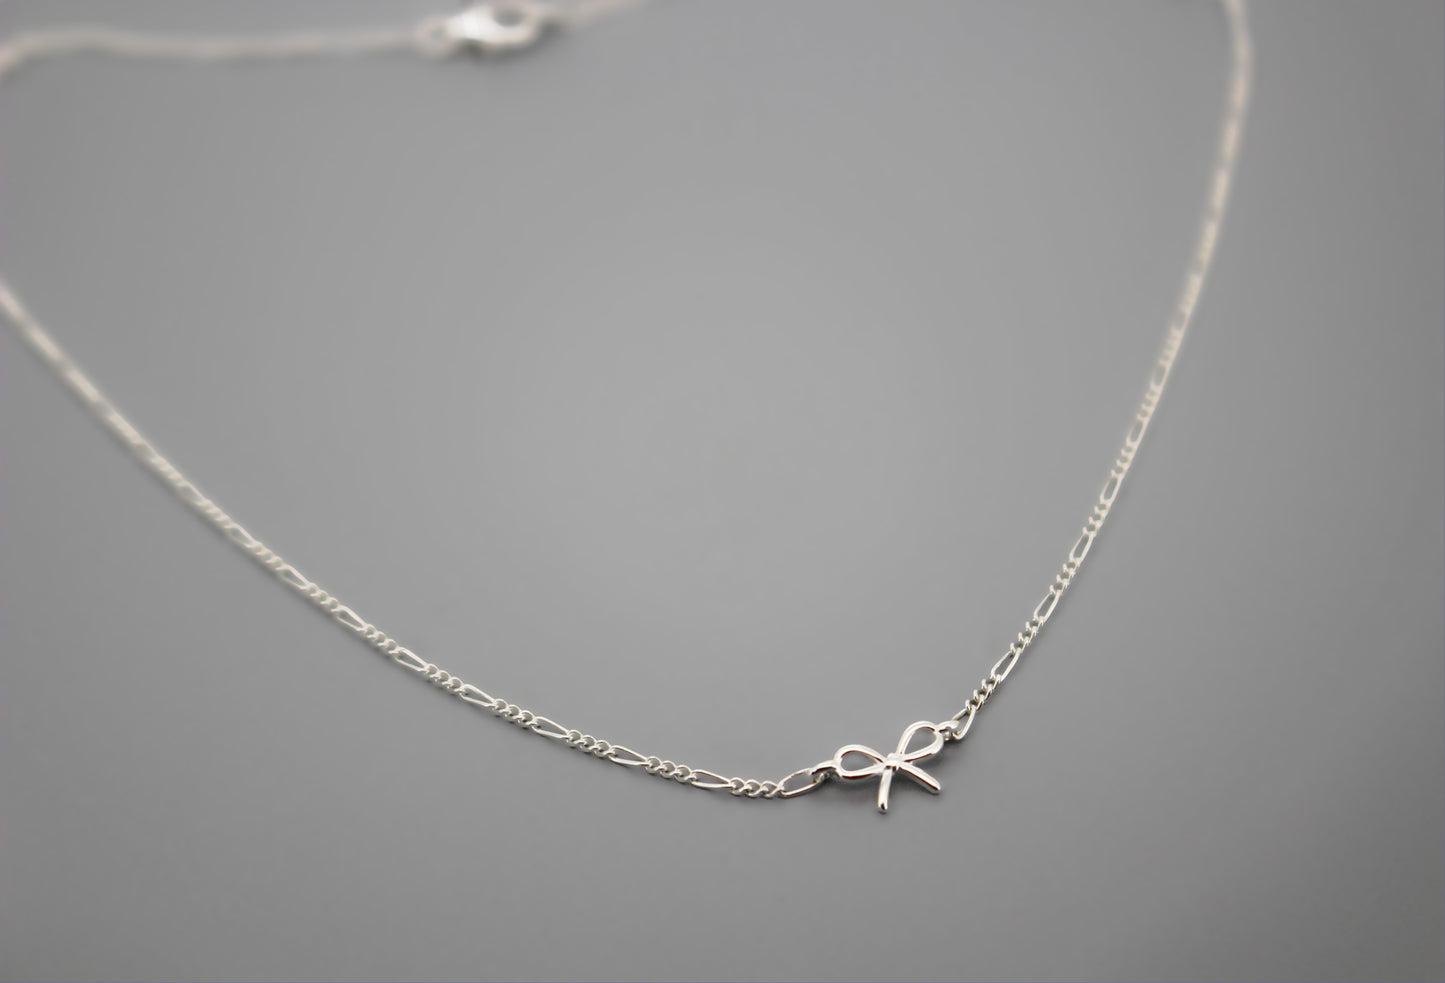 COQUETTE - Mini Bow Necklace in 925 Sterling Silver · Ribbon Bow · Gift for hew · Chain and Charm for Women · Tie the Knot